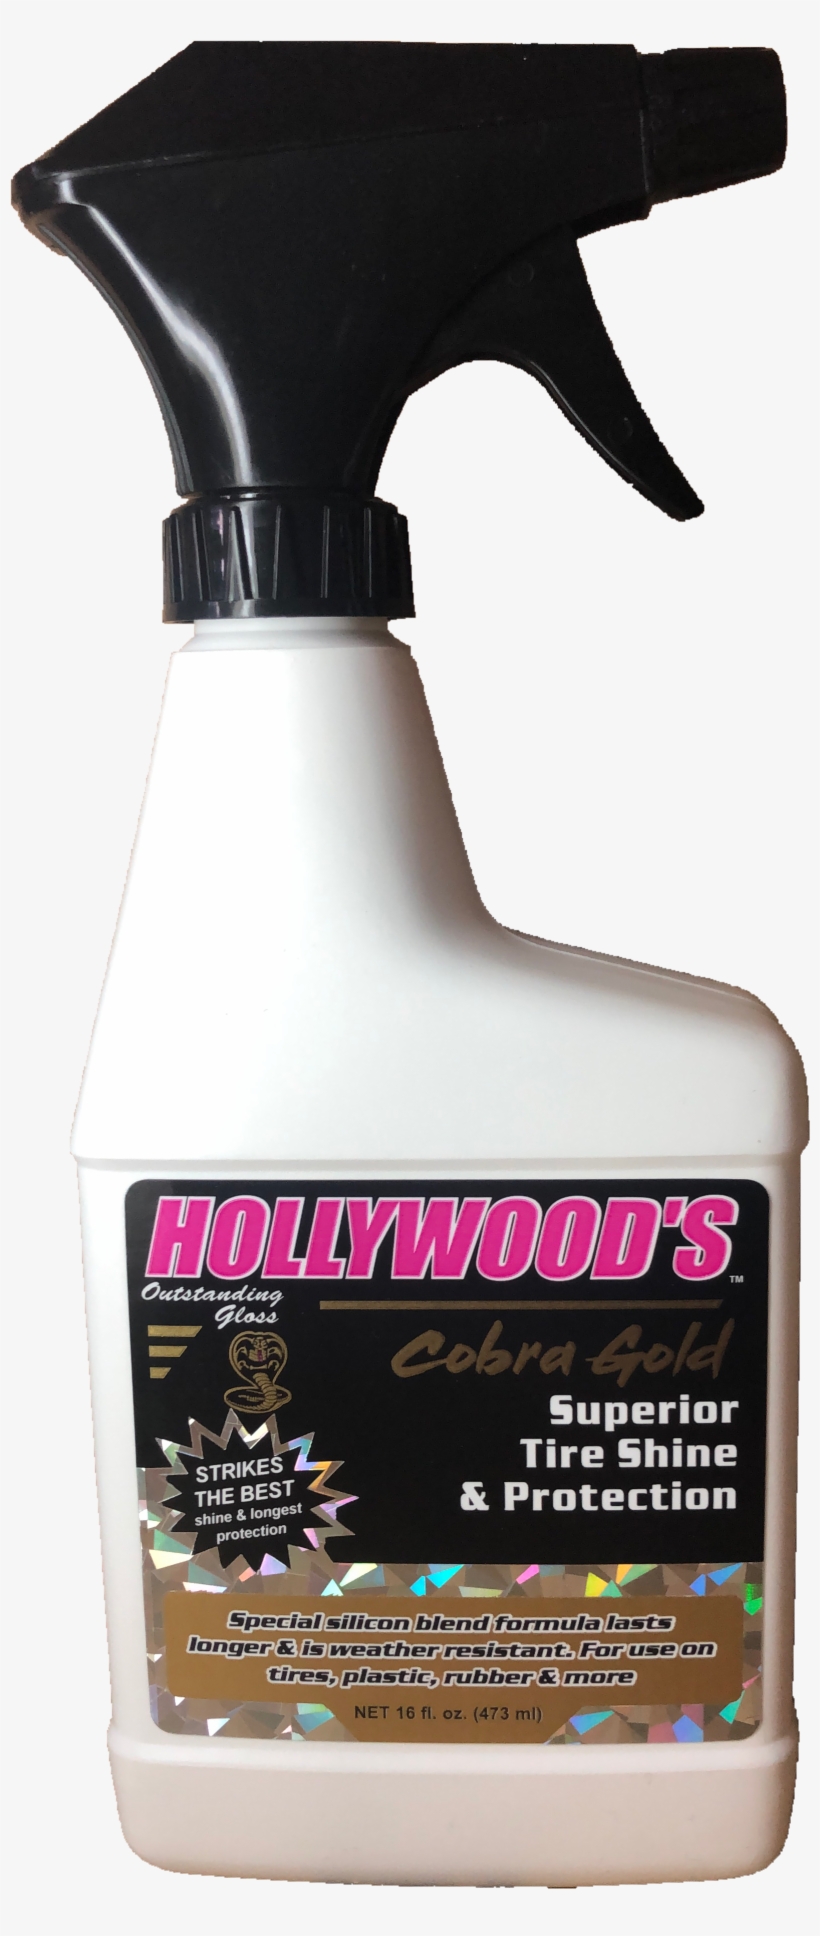 Hollywood's Cobra Gold Superior Tire Shine And Protection - Bee, transparent png #8769870